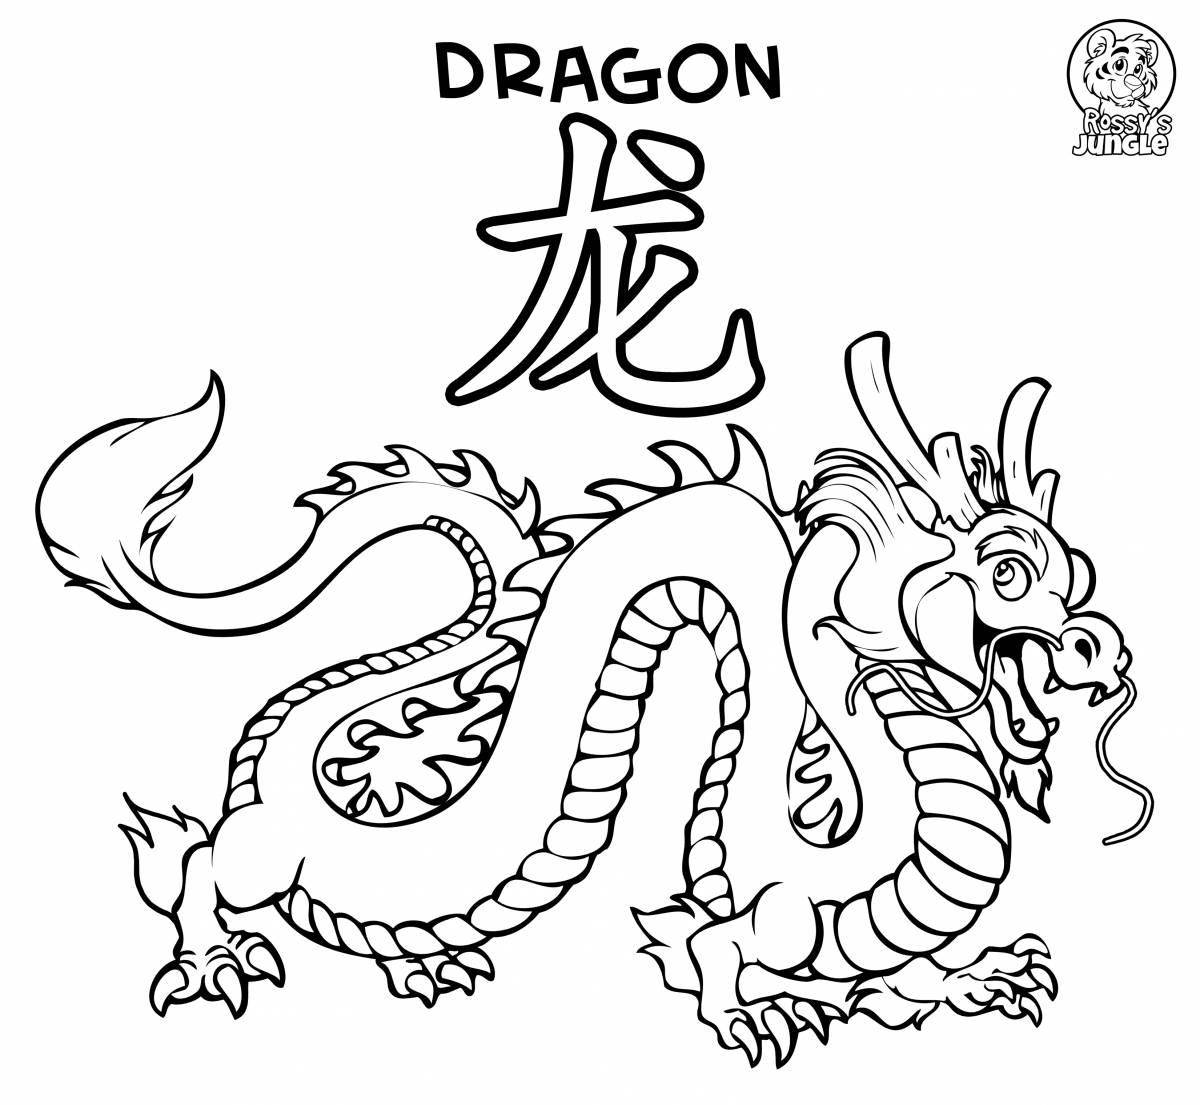 Delightful Chinese coloring book